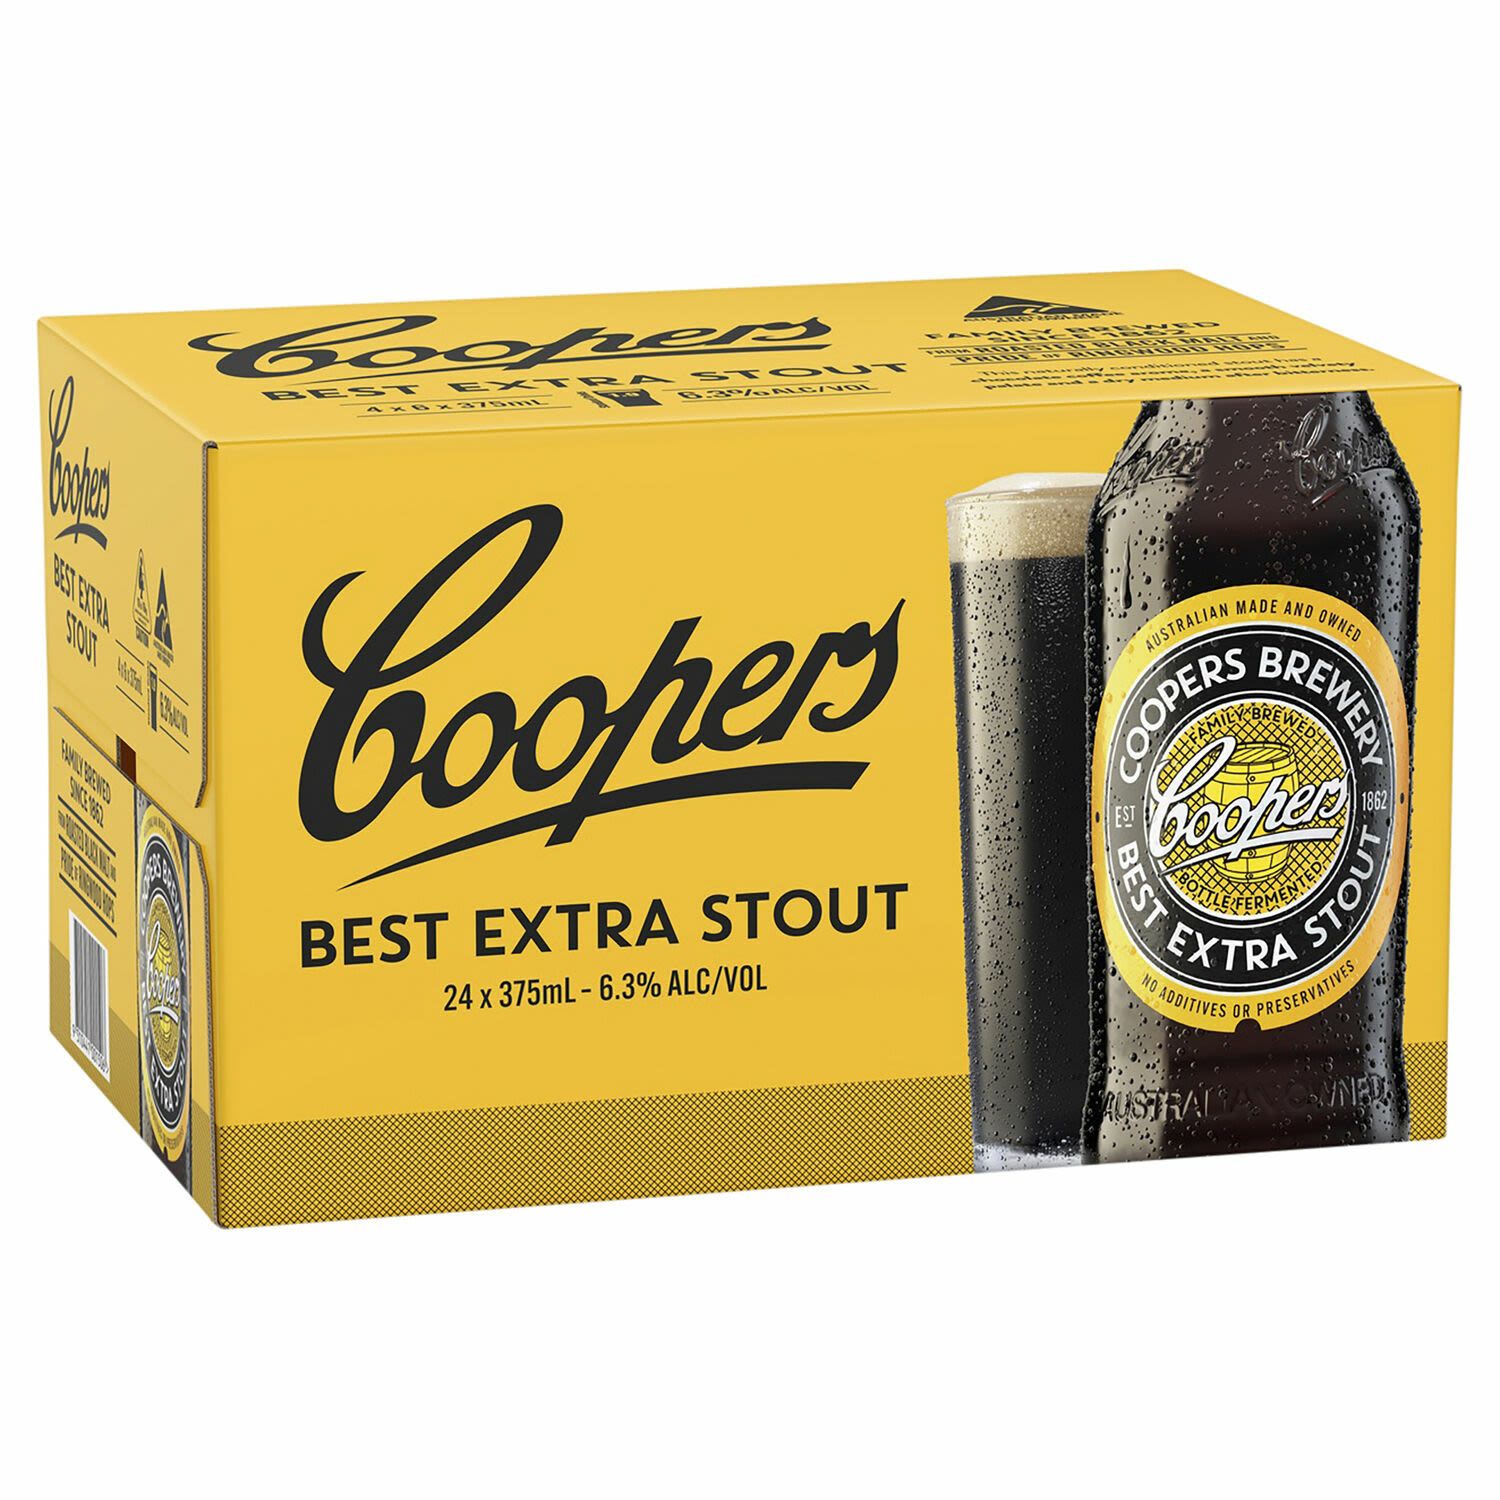 Coopers Best Extra Stout Bottle 375mL 24 Pack